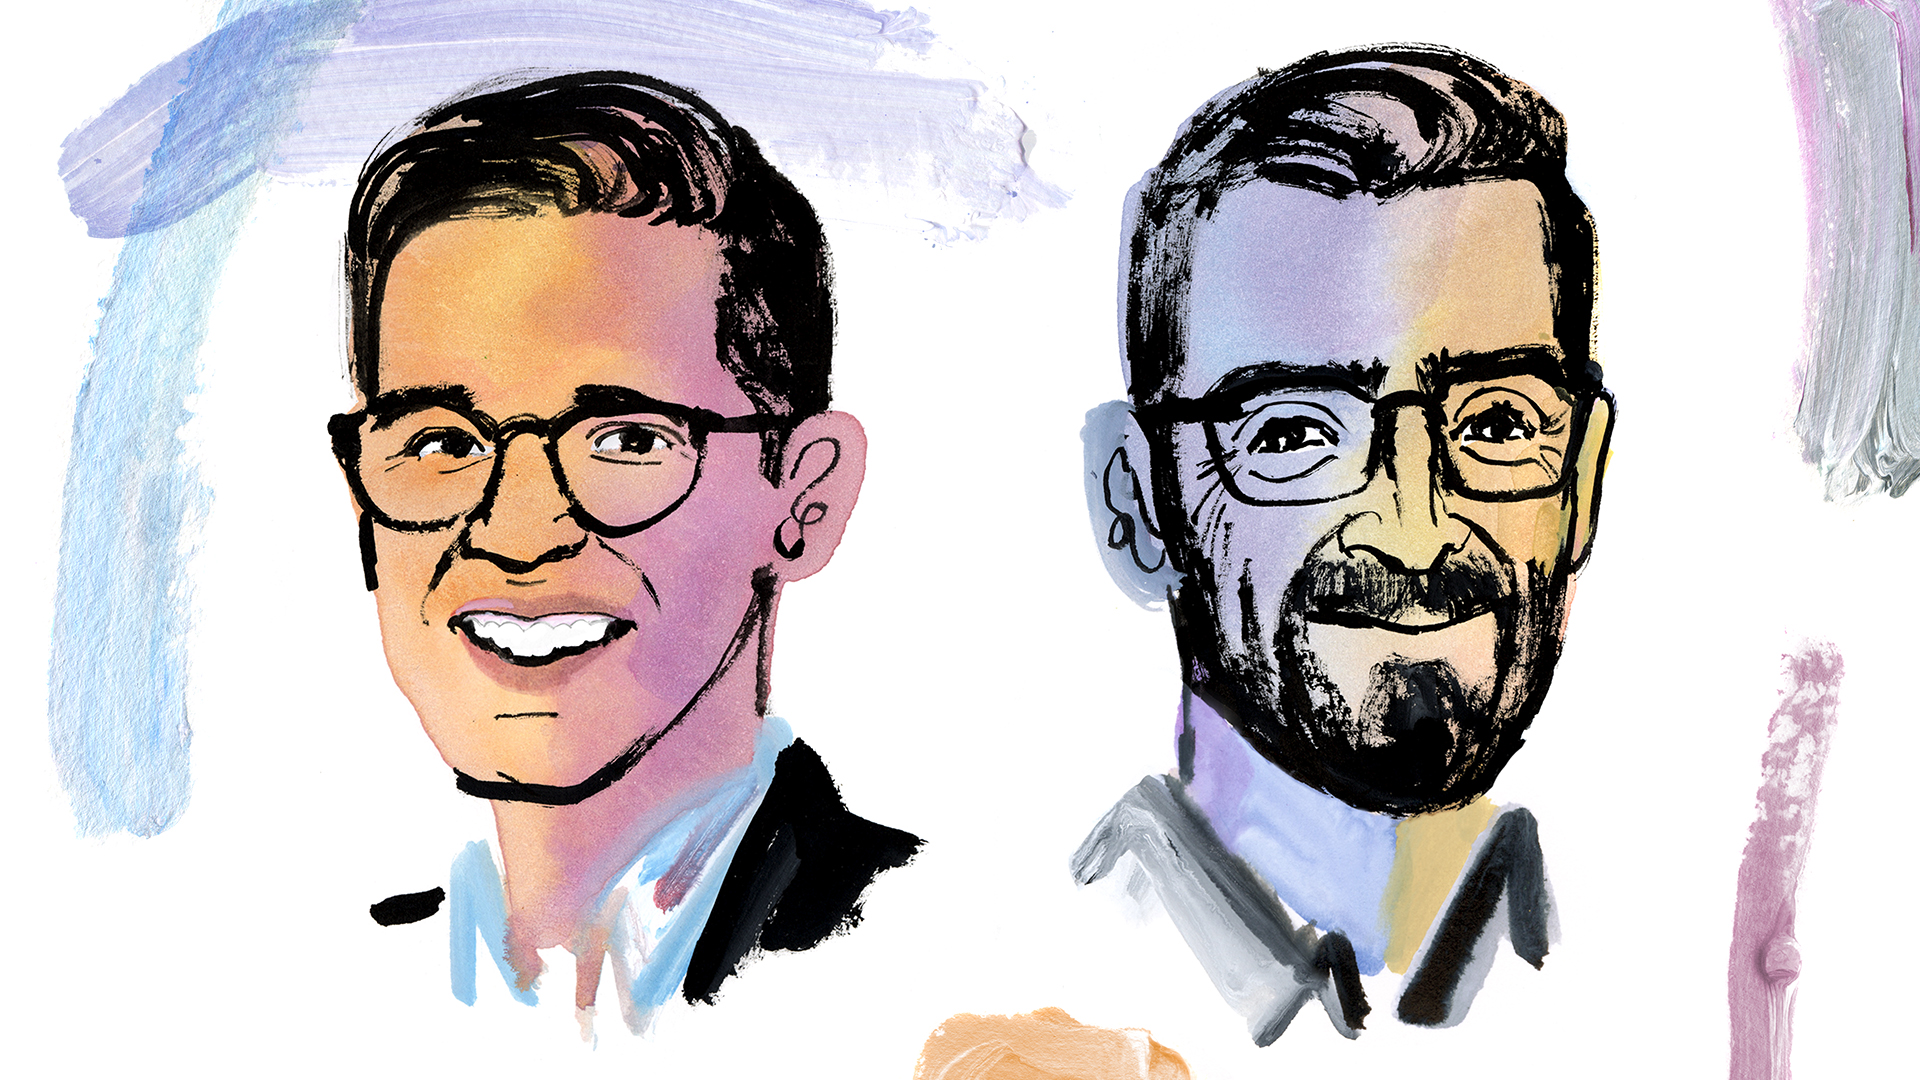 Illustrated portraits of Alec Stapp and Caleb Watney